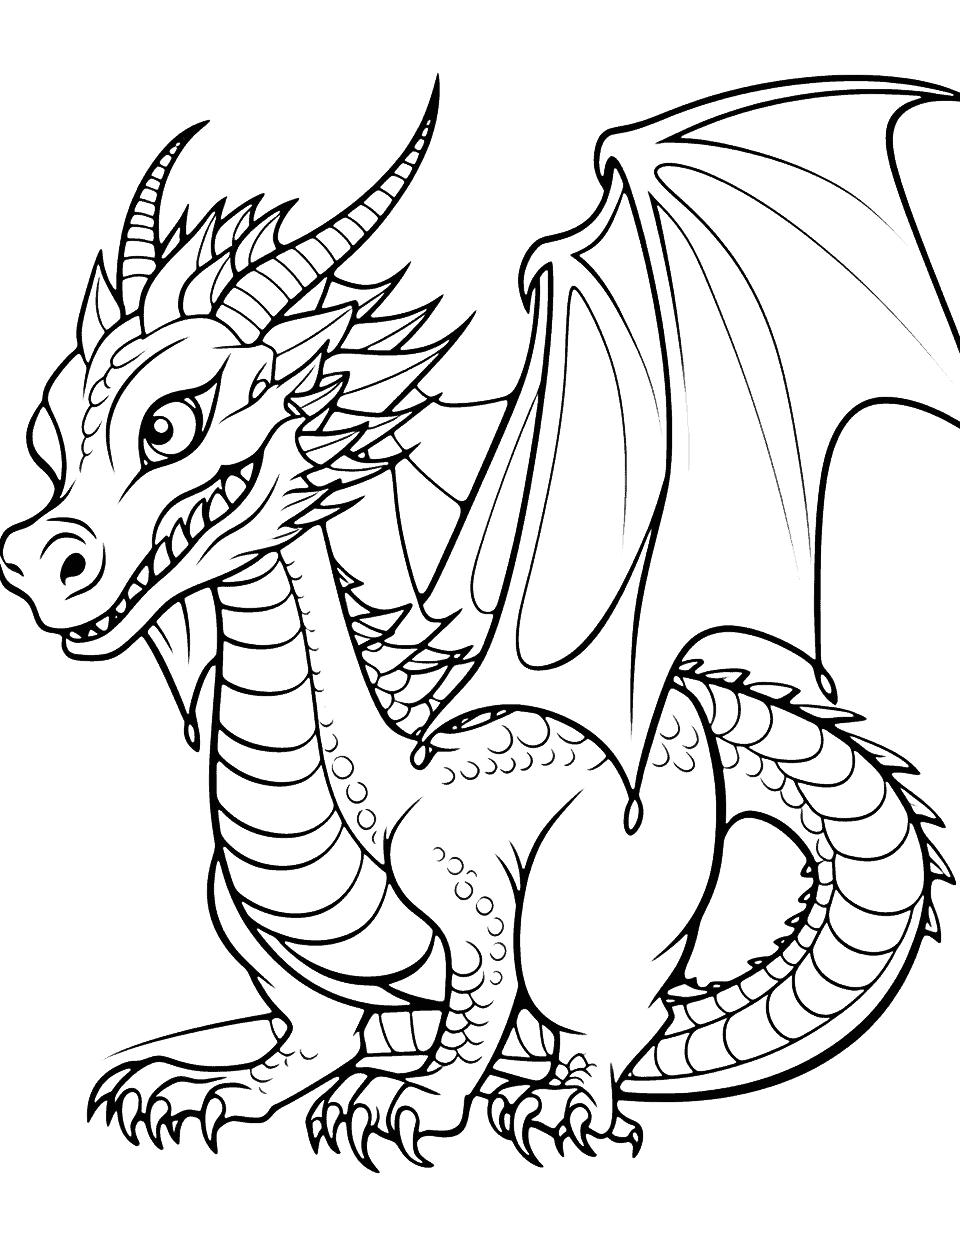 Fantasy Dragon Coloring Page - A fantasy-style dragon with glowing eyes and shimmering scales.